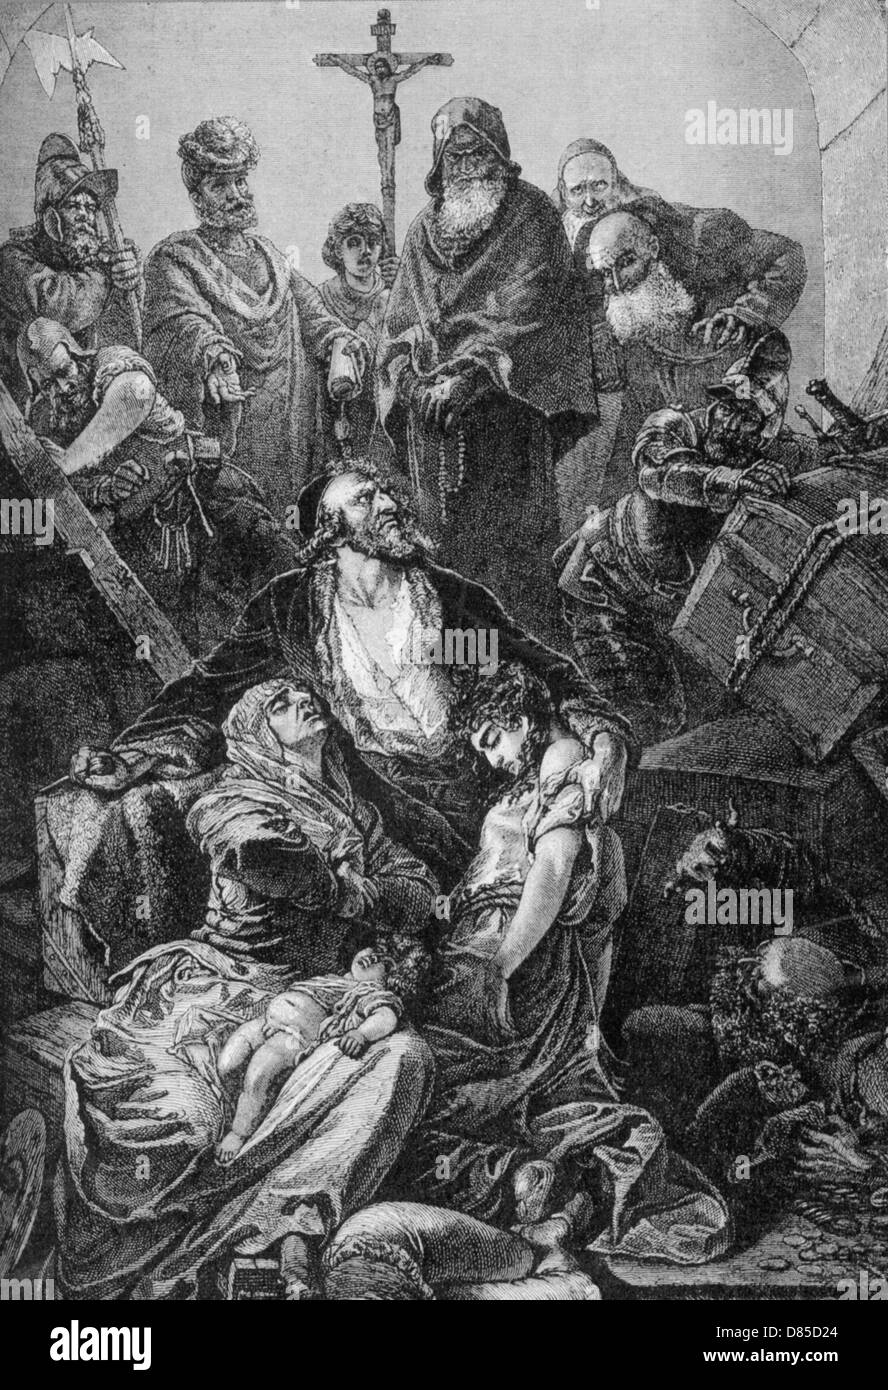 THE JEWS ARE EXPELLED FROM SPAIN in 1492 as shown in an early 19th century engraving Stock Photo